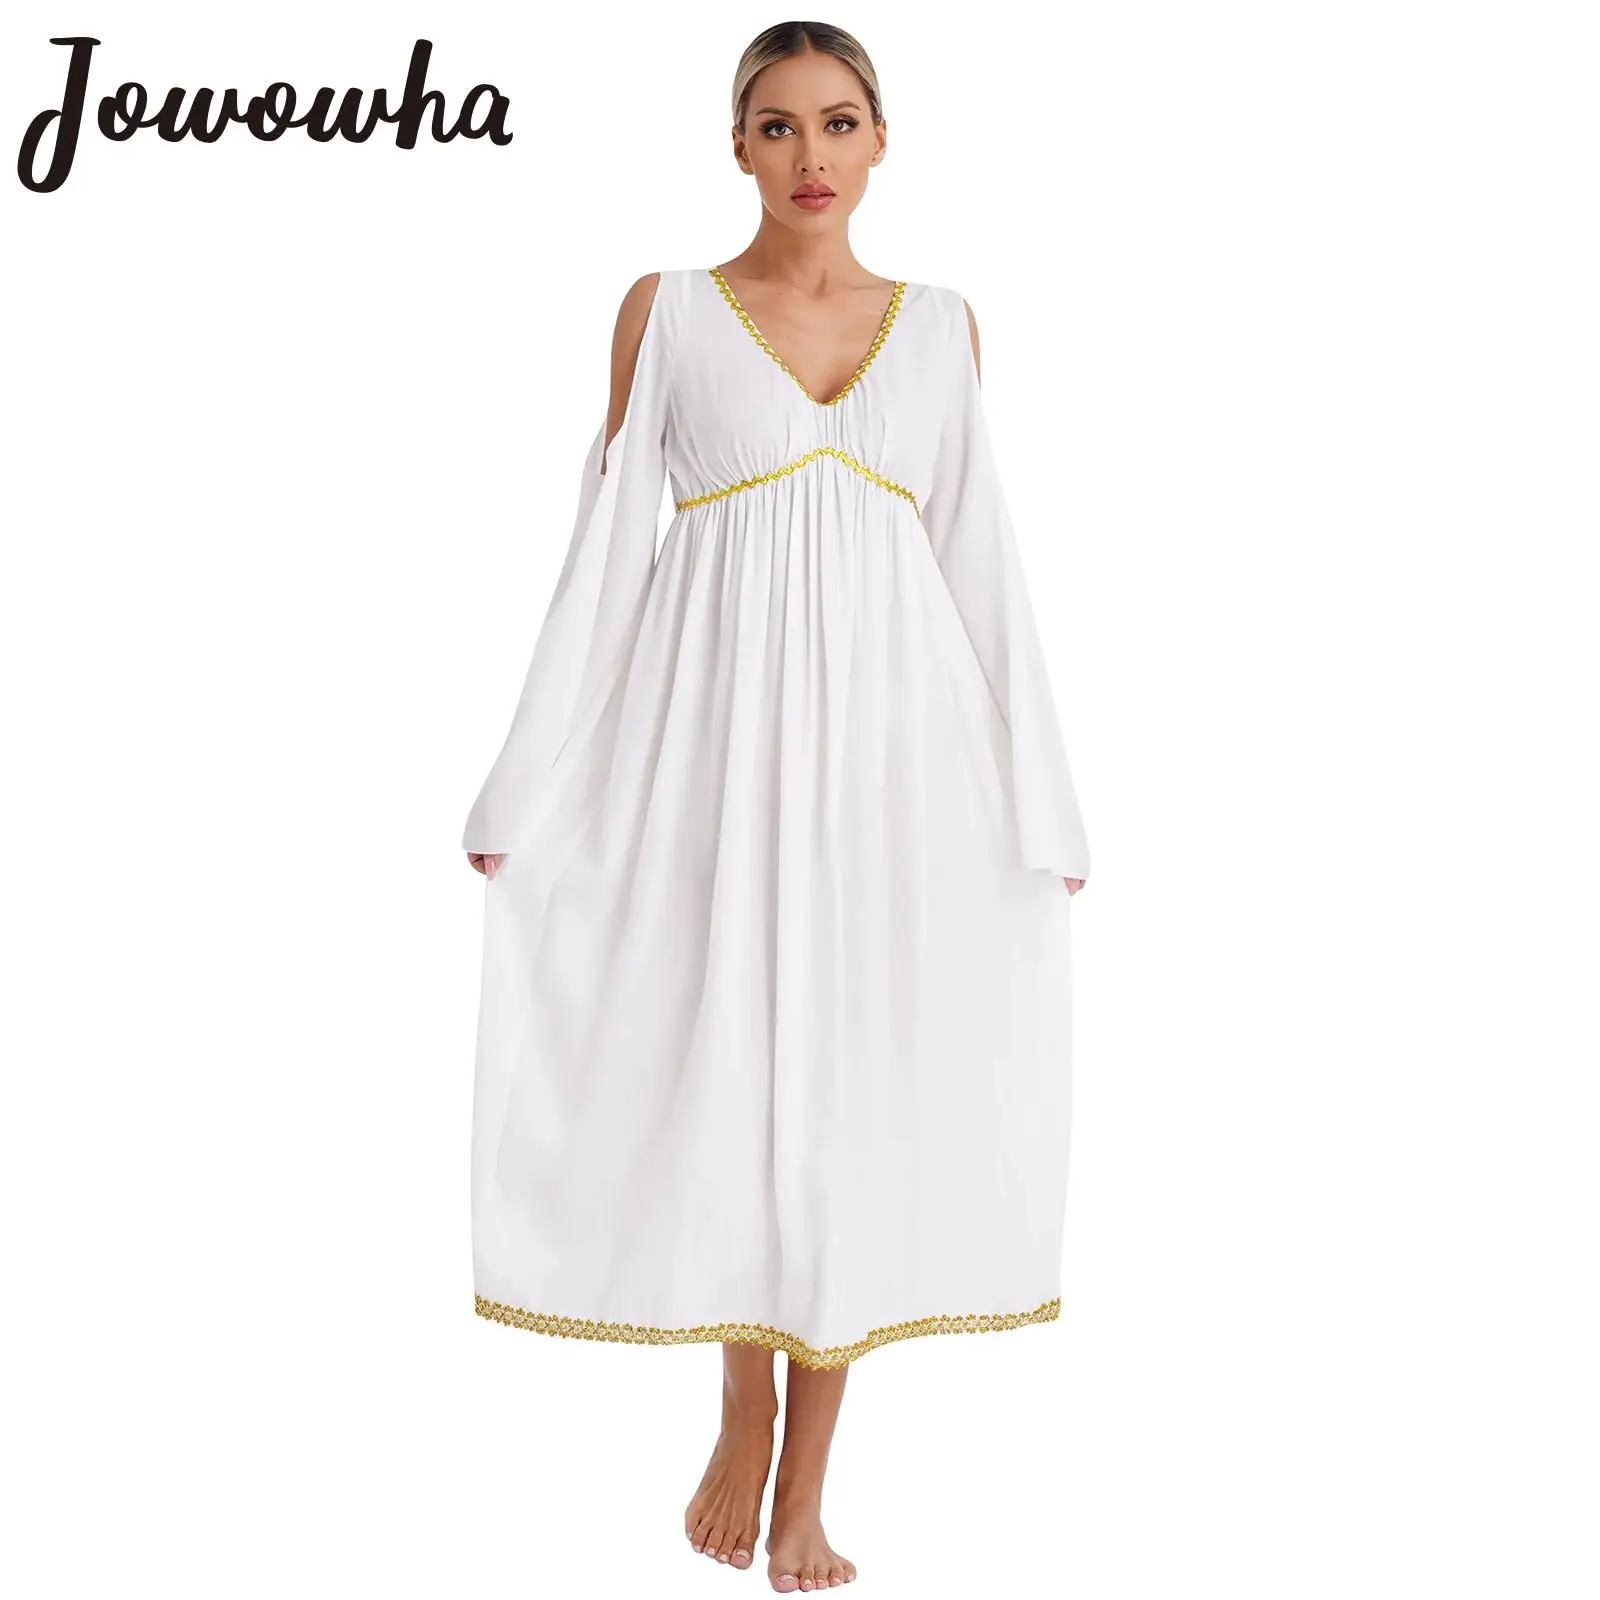 

Womens Halloween Naivete Angel Cosplay Costume Flare Sleeve Gold Waved Trim Flowy Chiffon Empire Dress Carnival Party Role Play